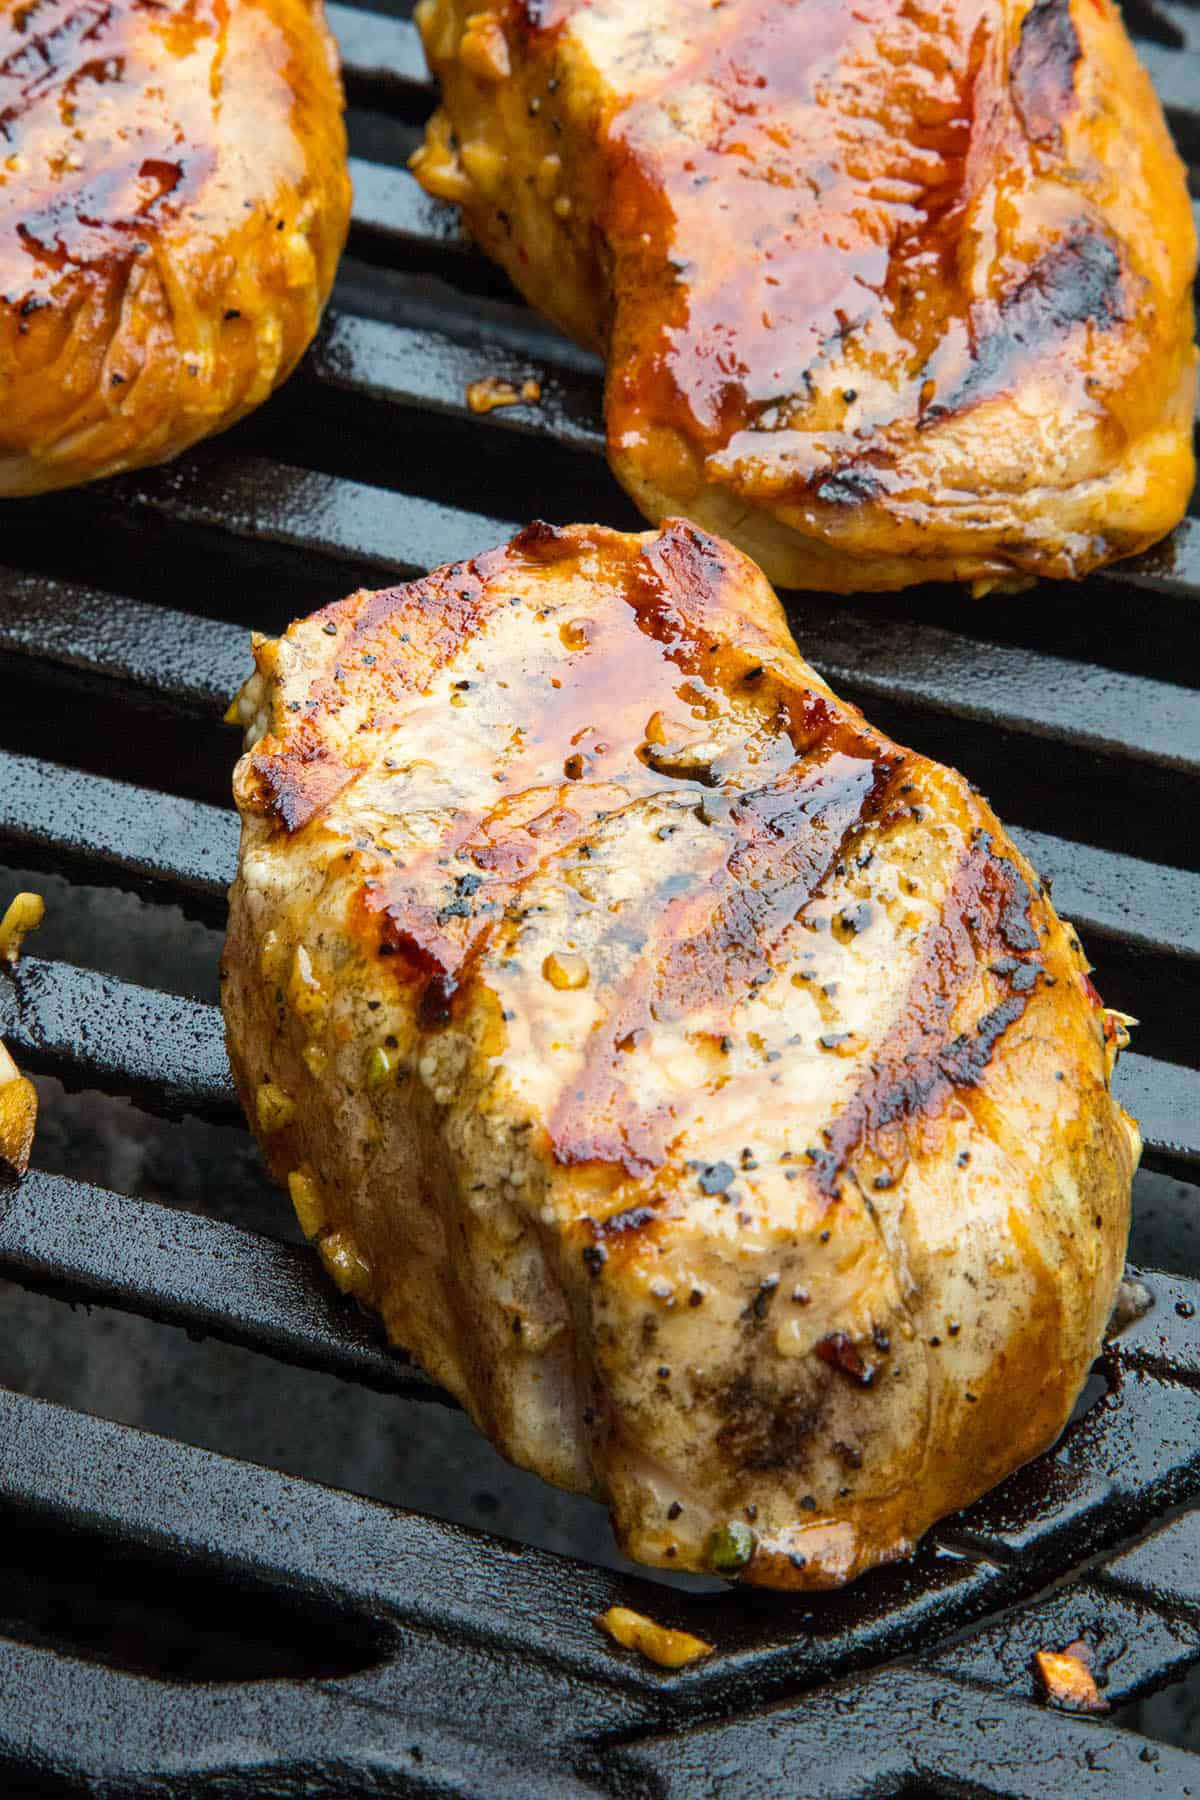 Juicy pork chops on the grill